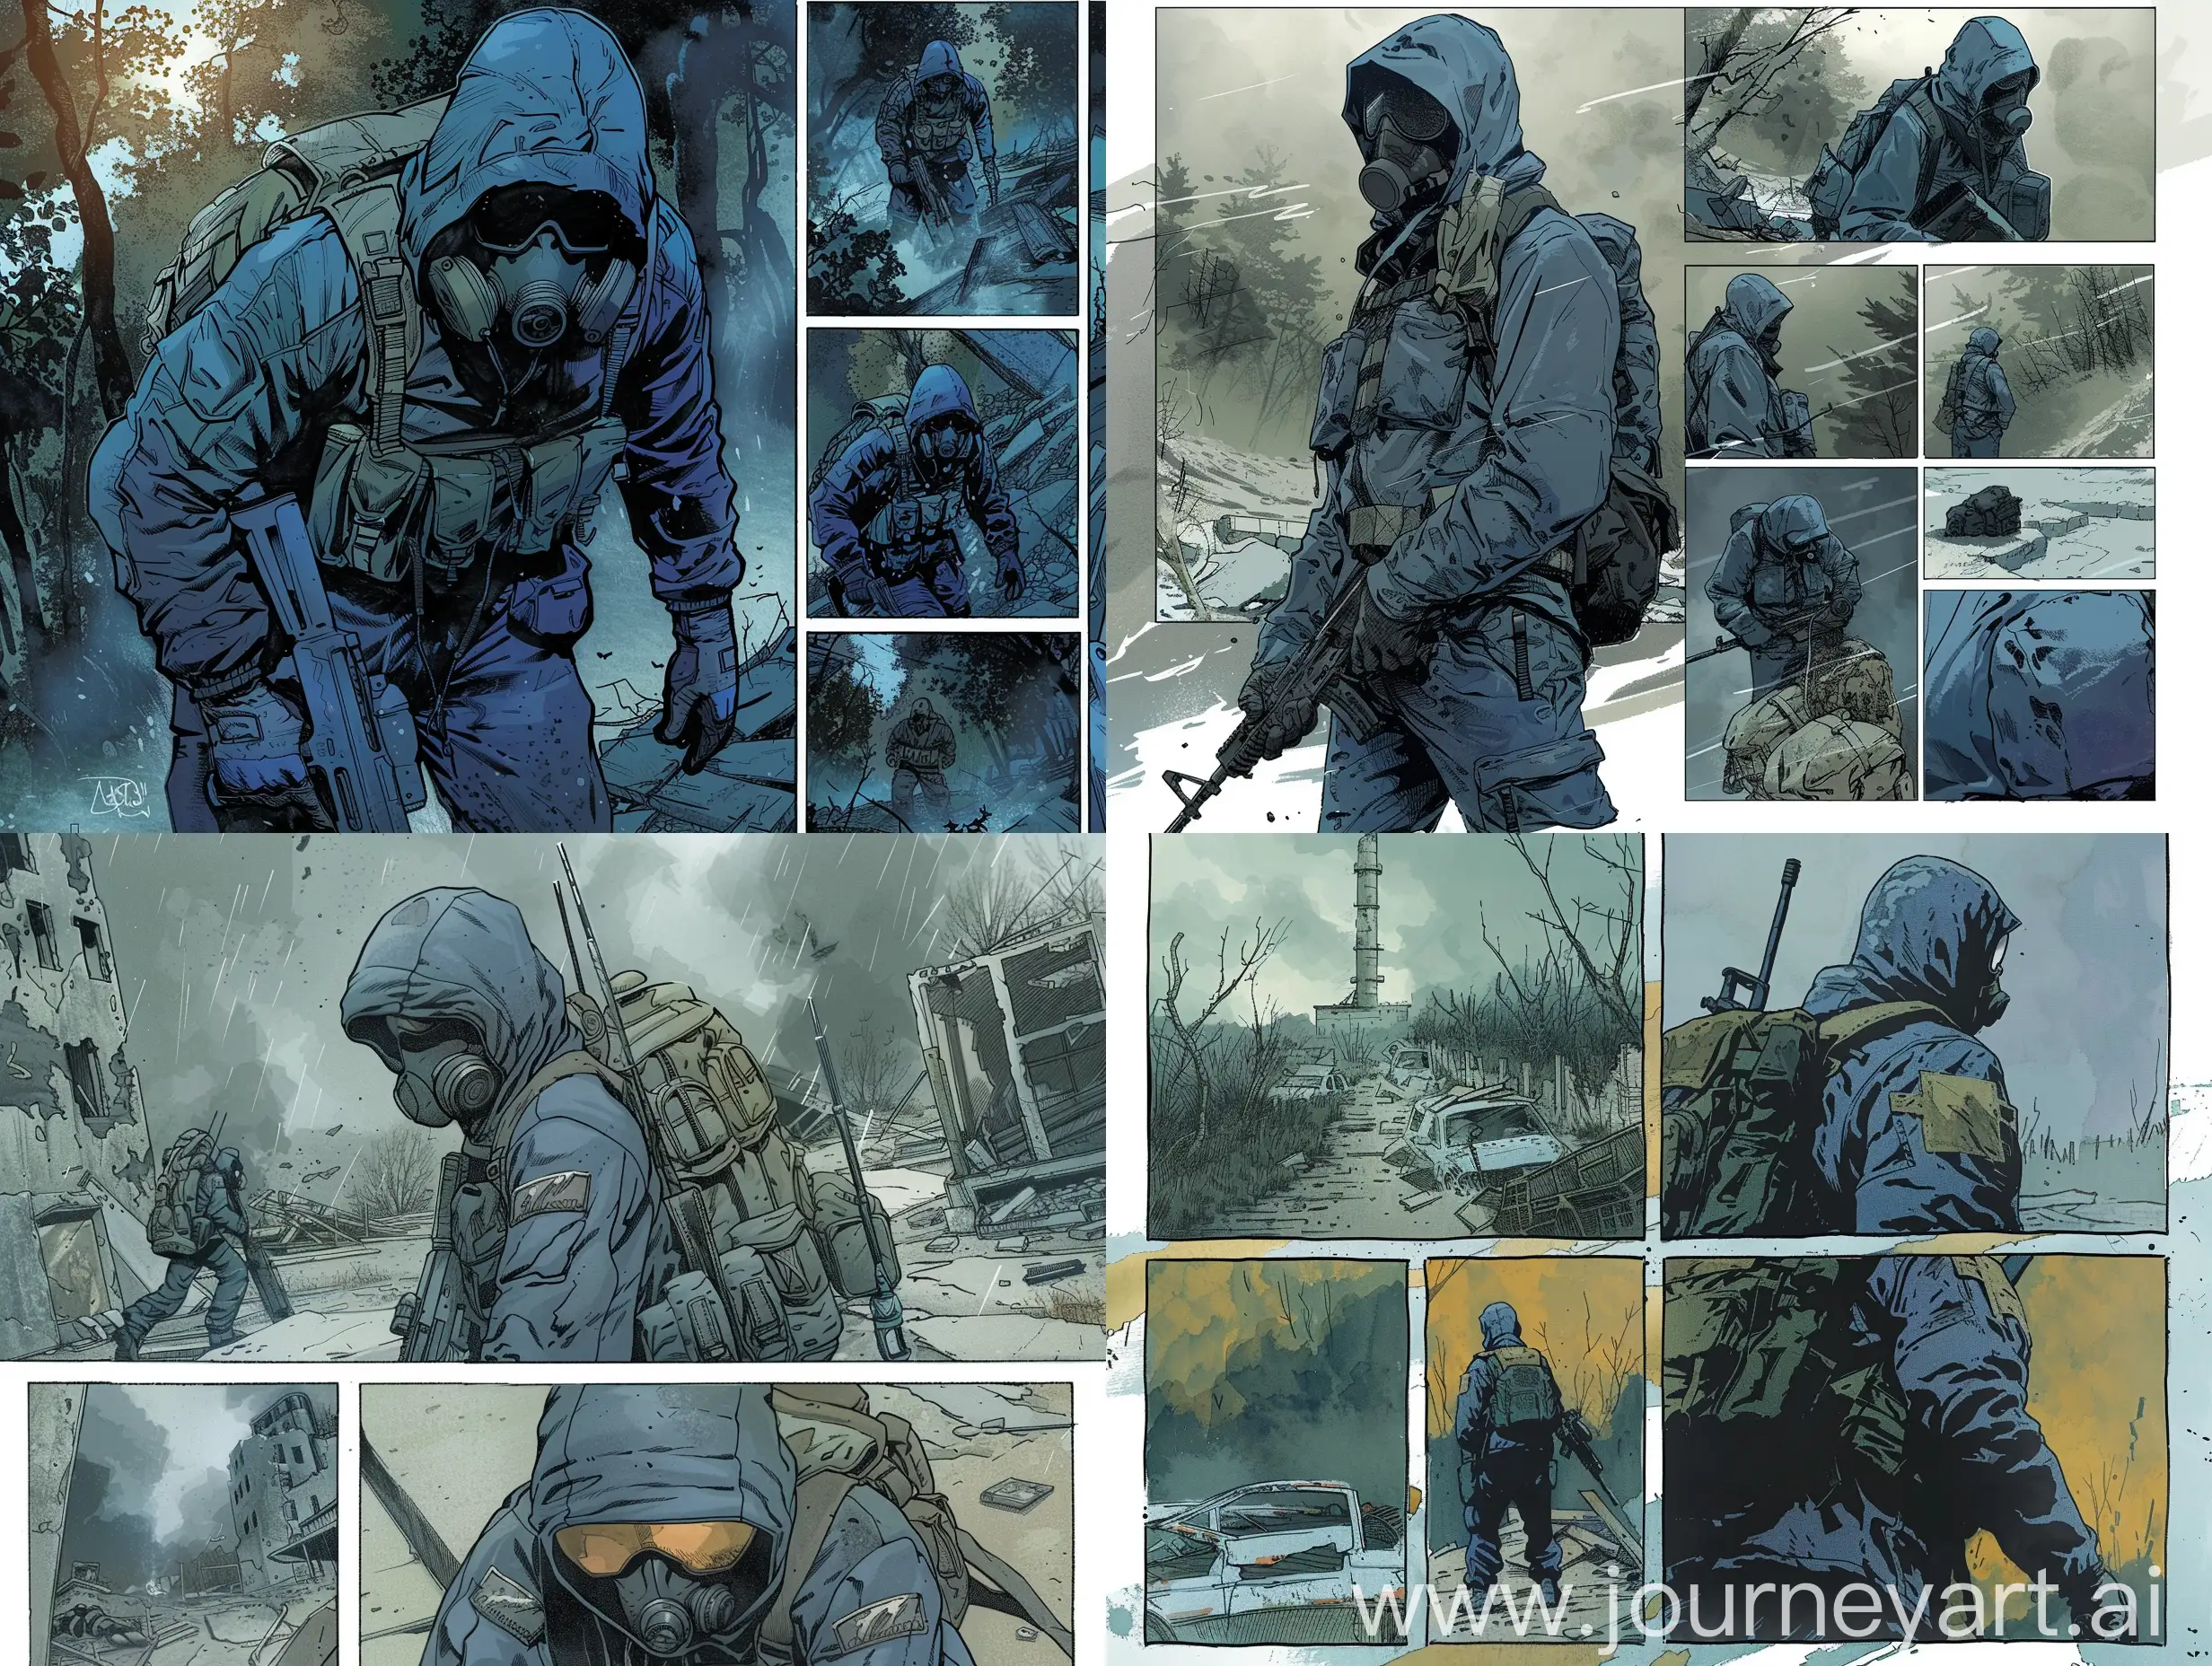 Stalker-Manga-Page-Exploring-Chernobyl-Zone-with-Sniper-Rifle